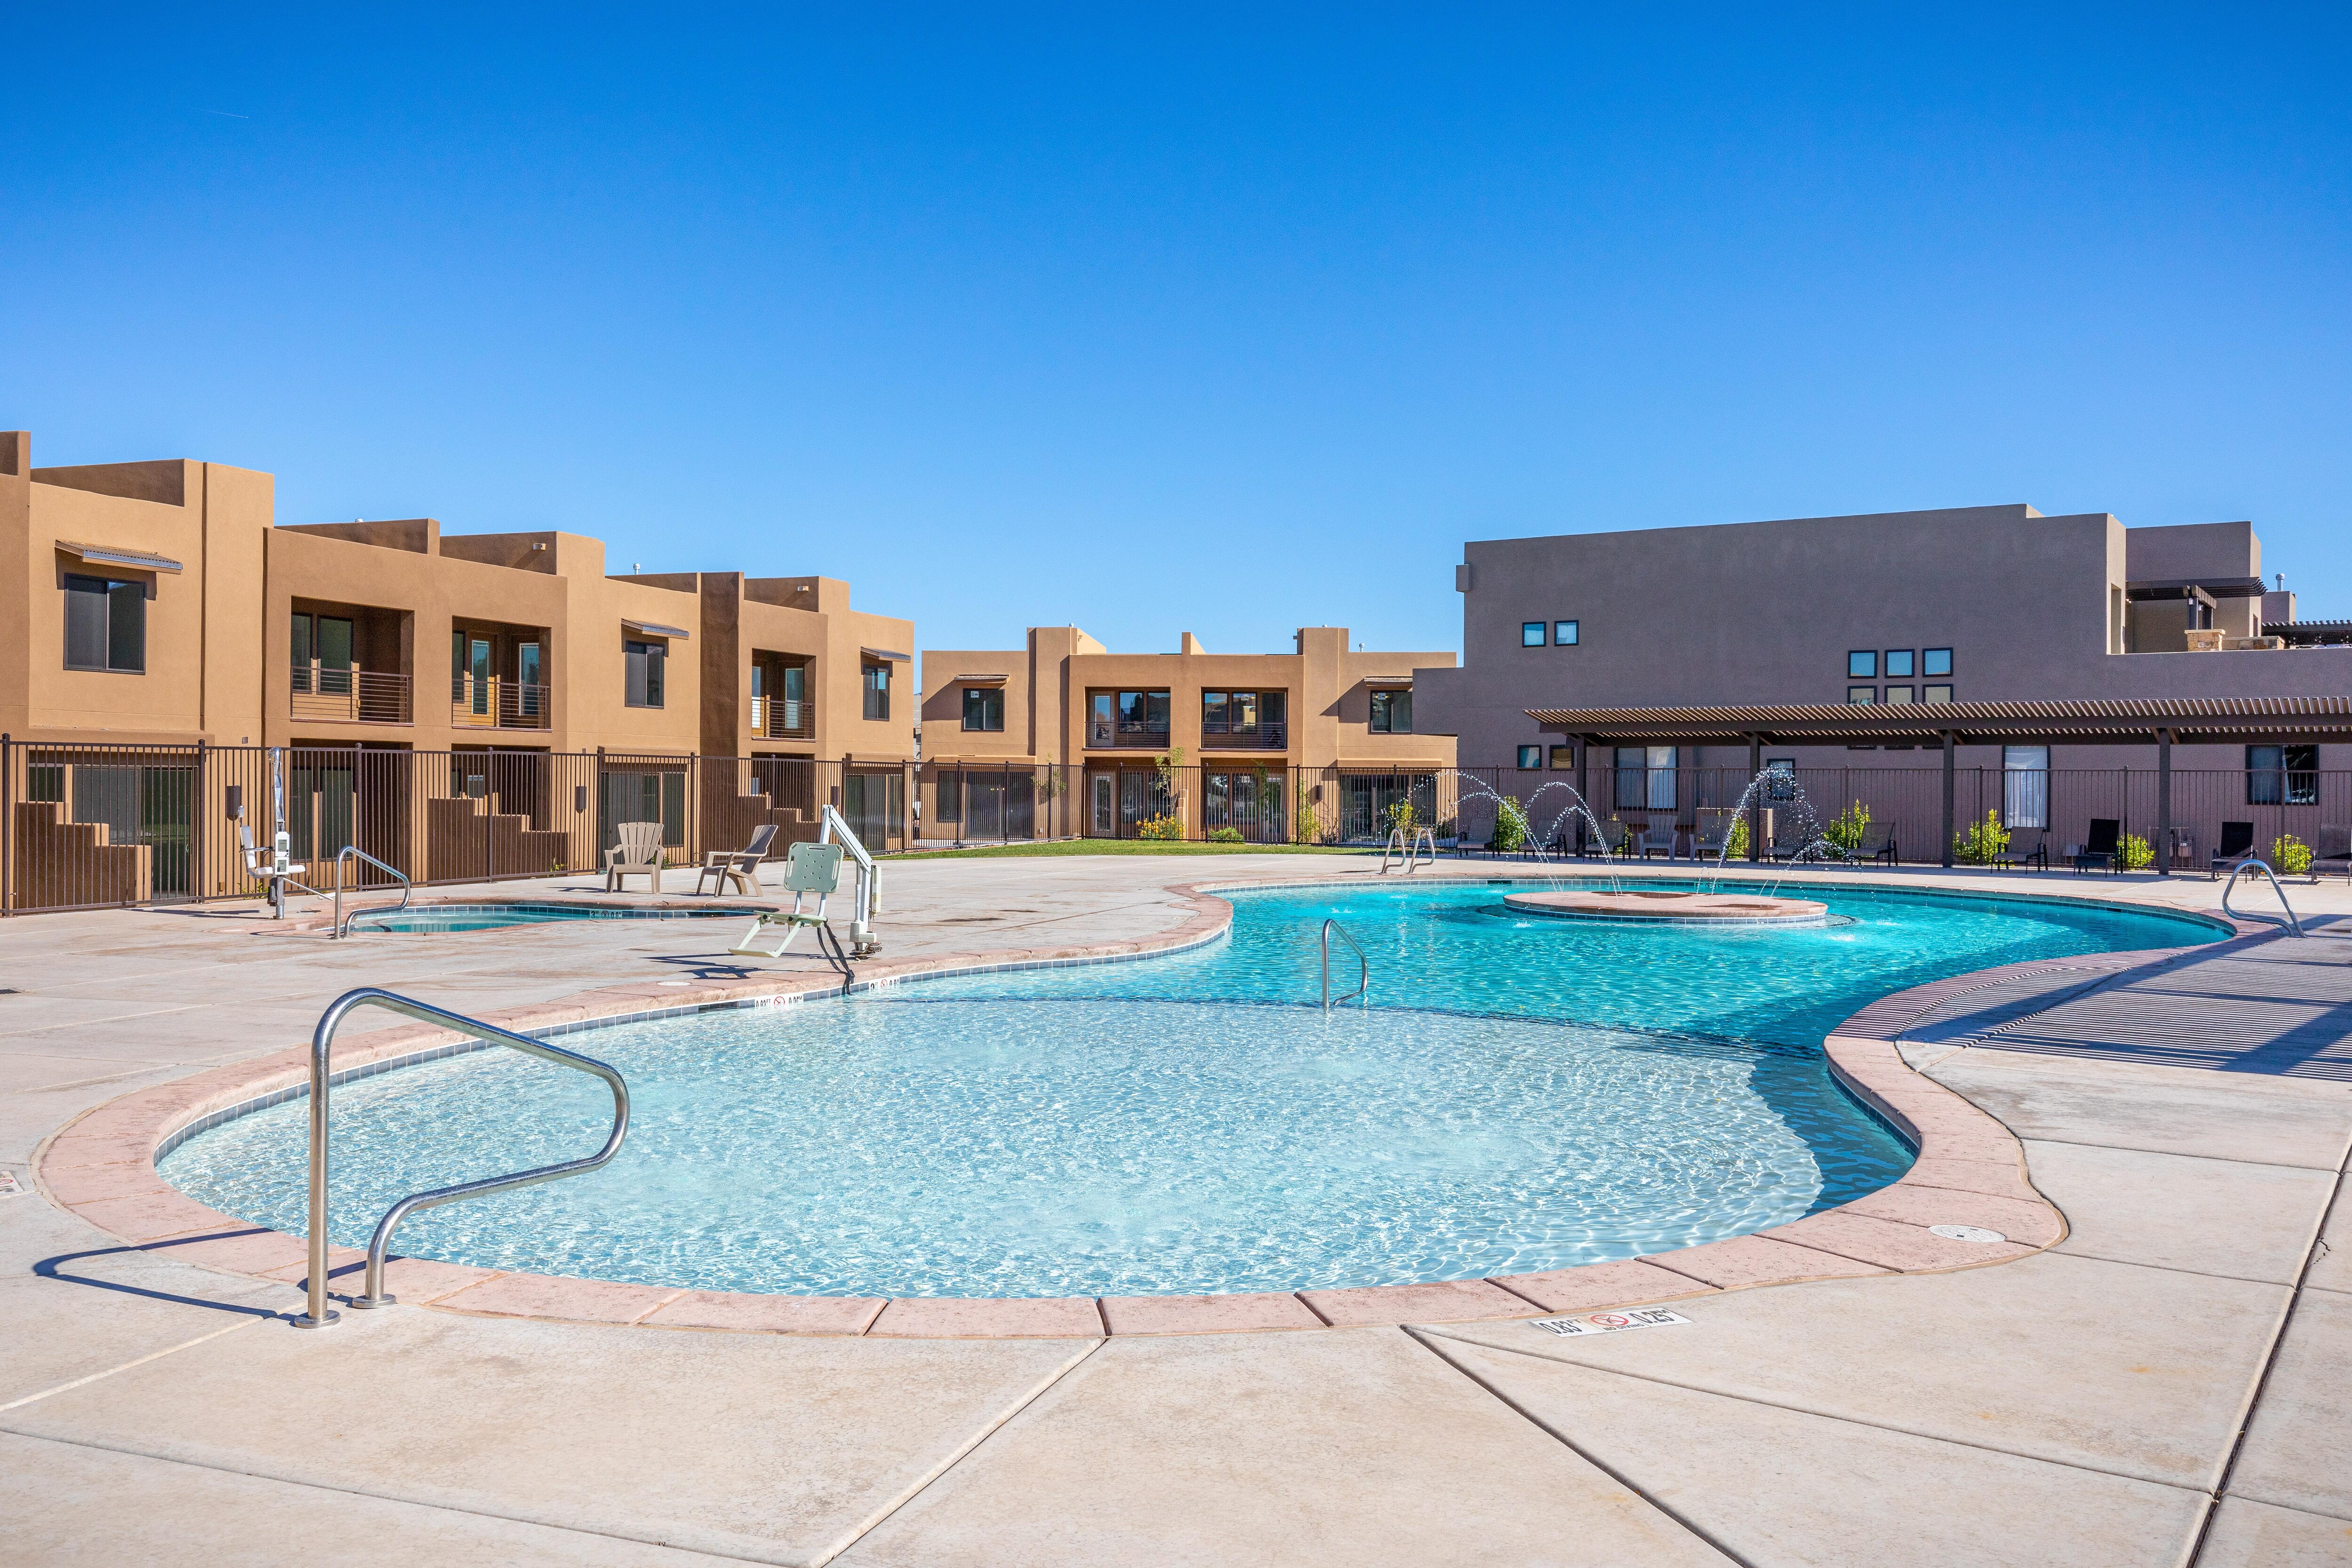 Pool 2 is heated year-round and includes a deeper swimming area and a shallow kid’s area.